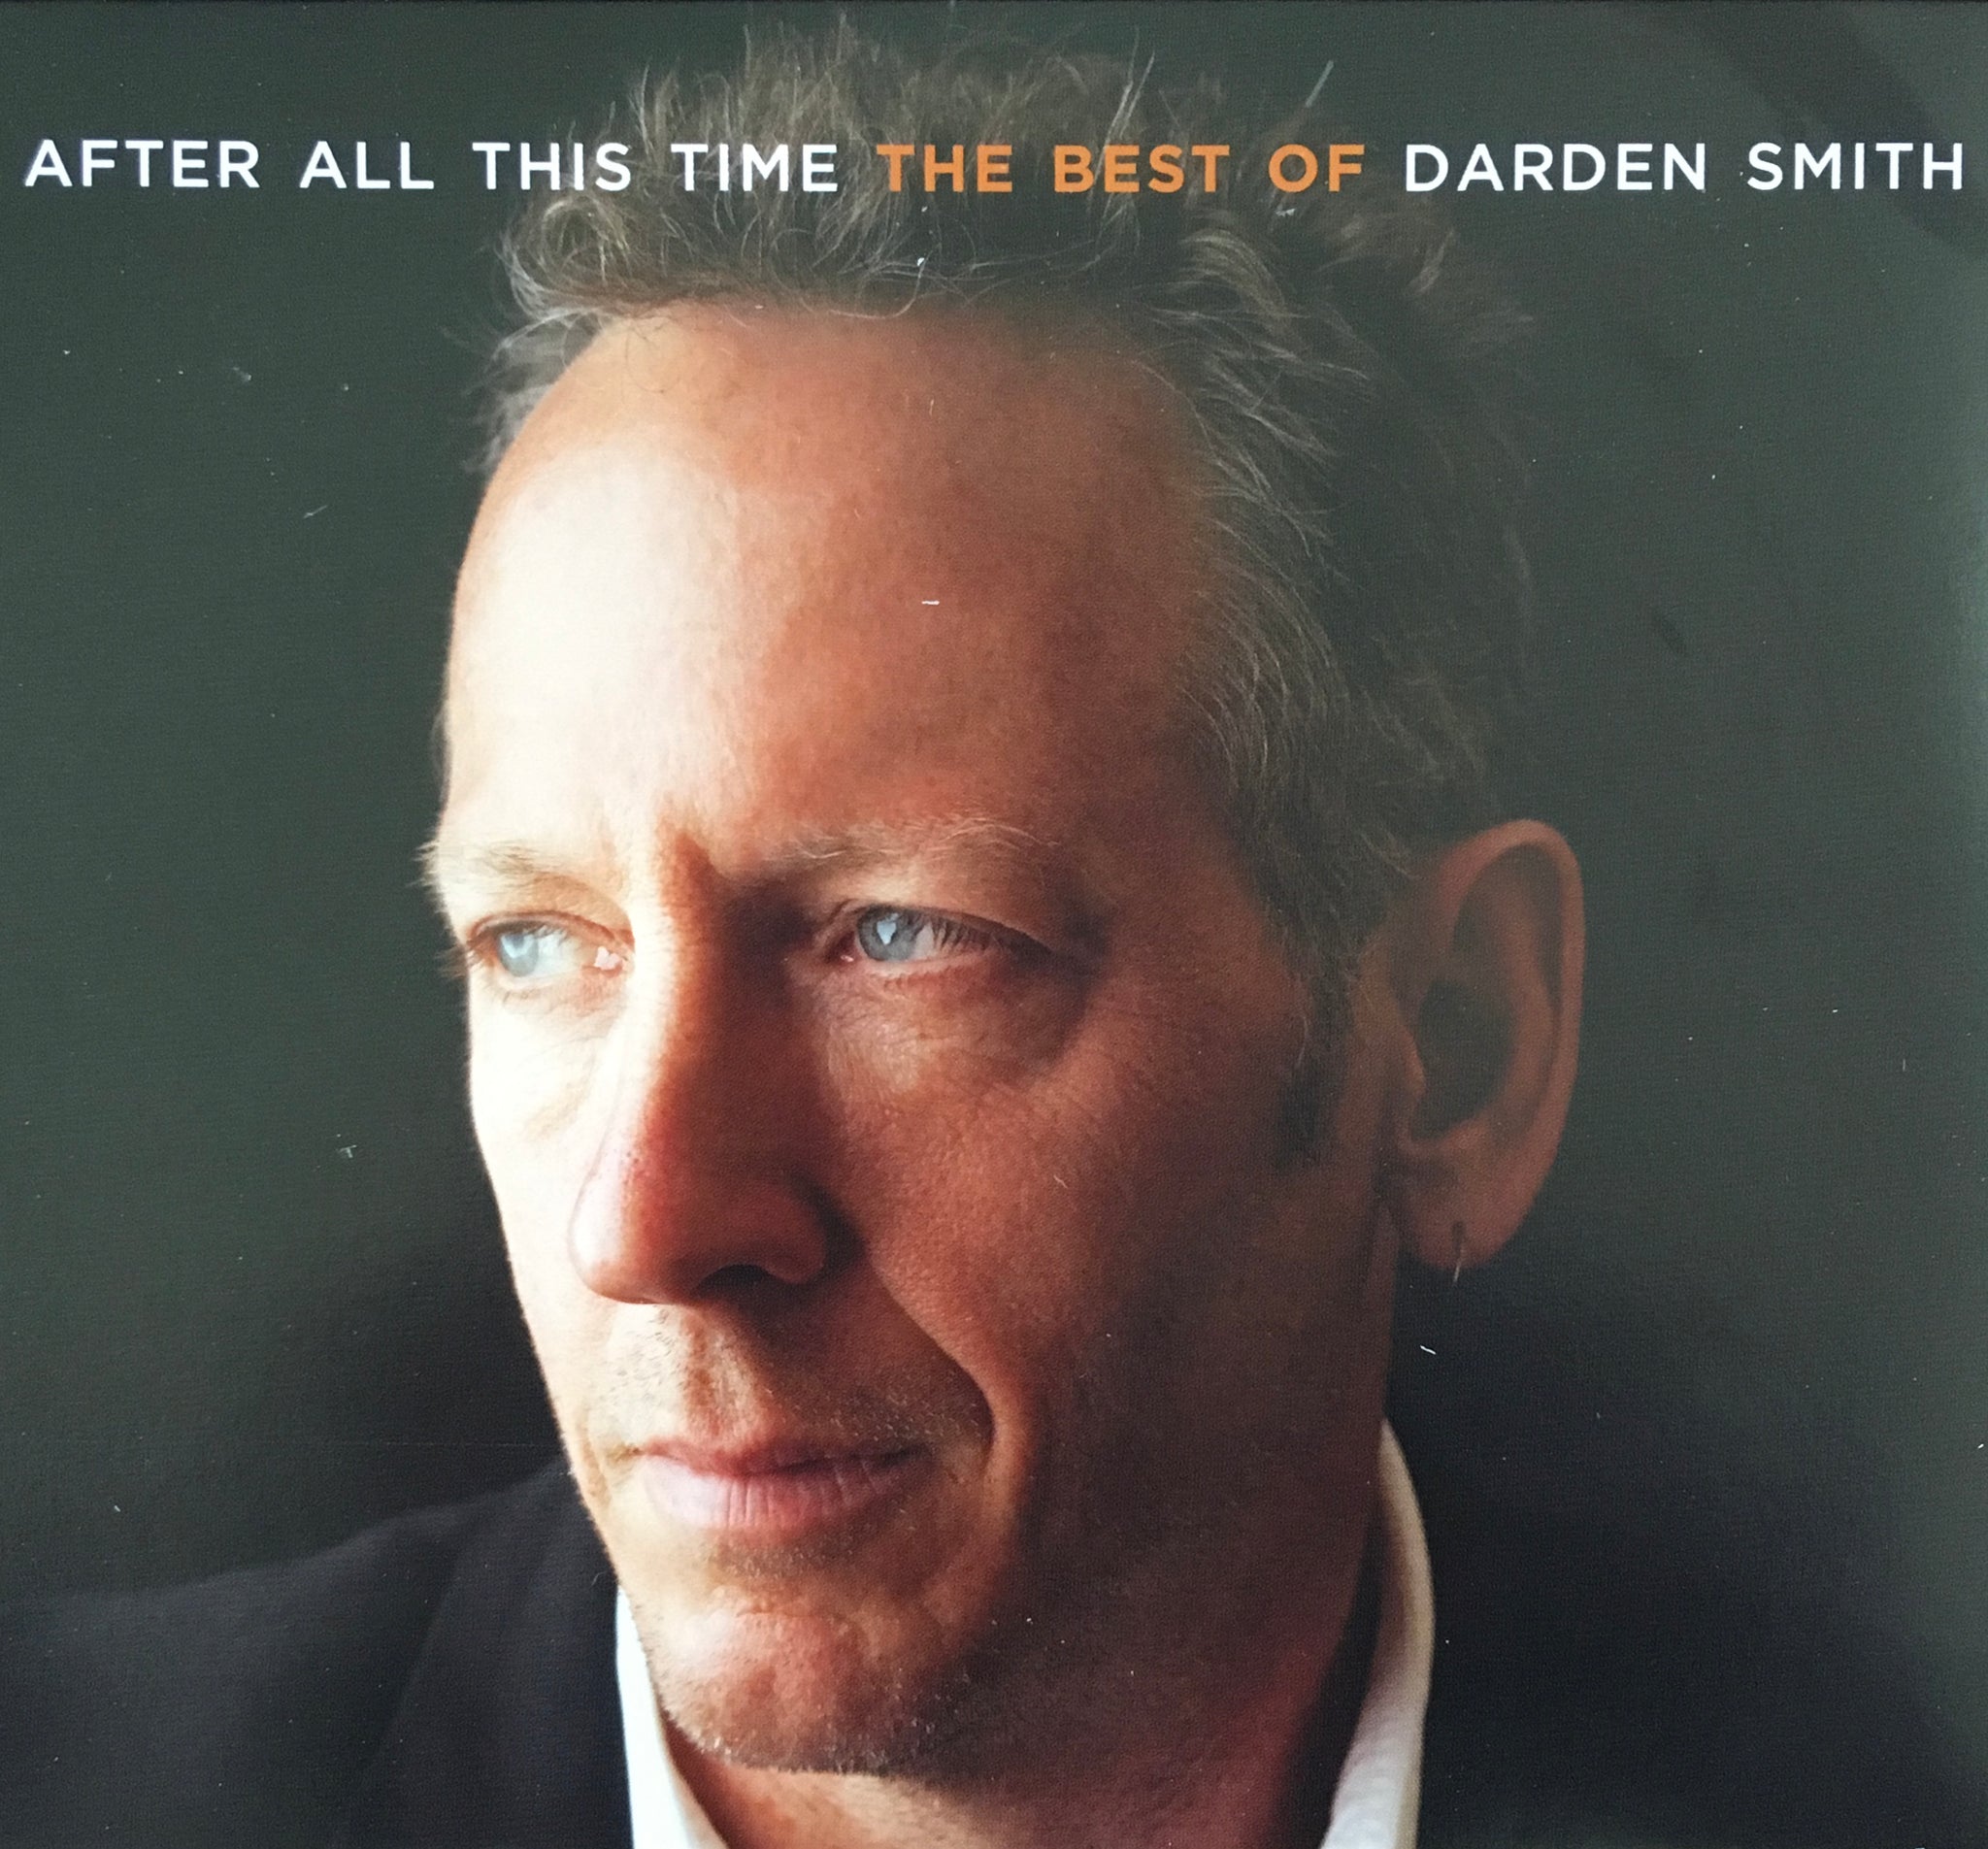 After All this Time - The Best of Darden Smith